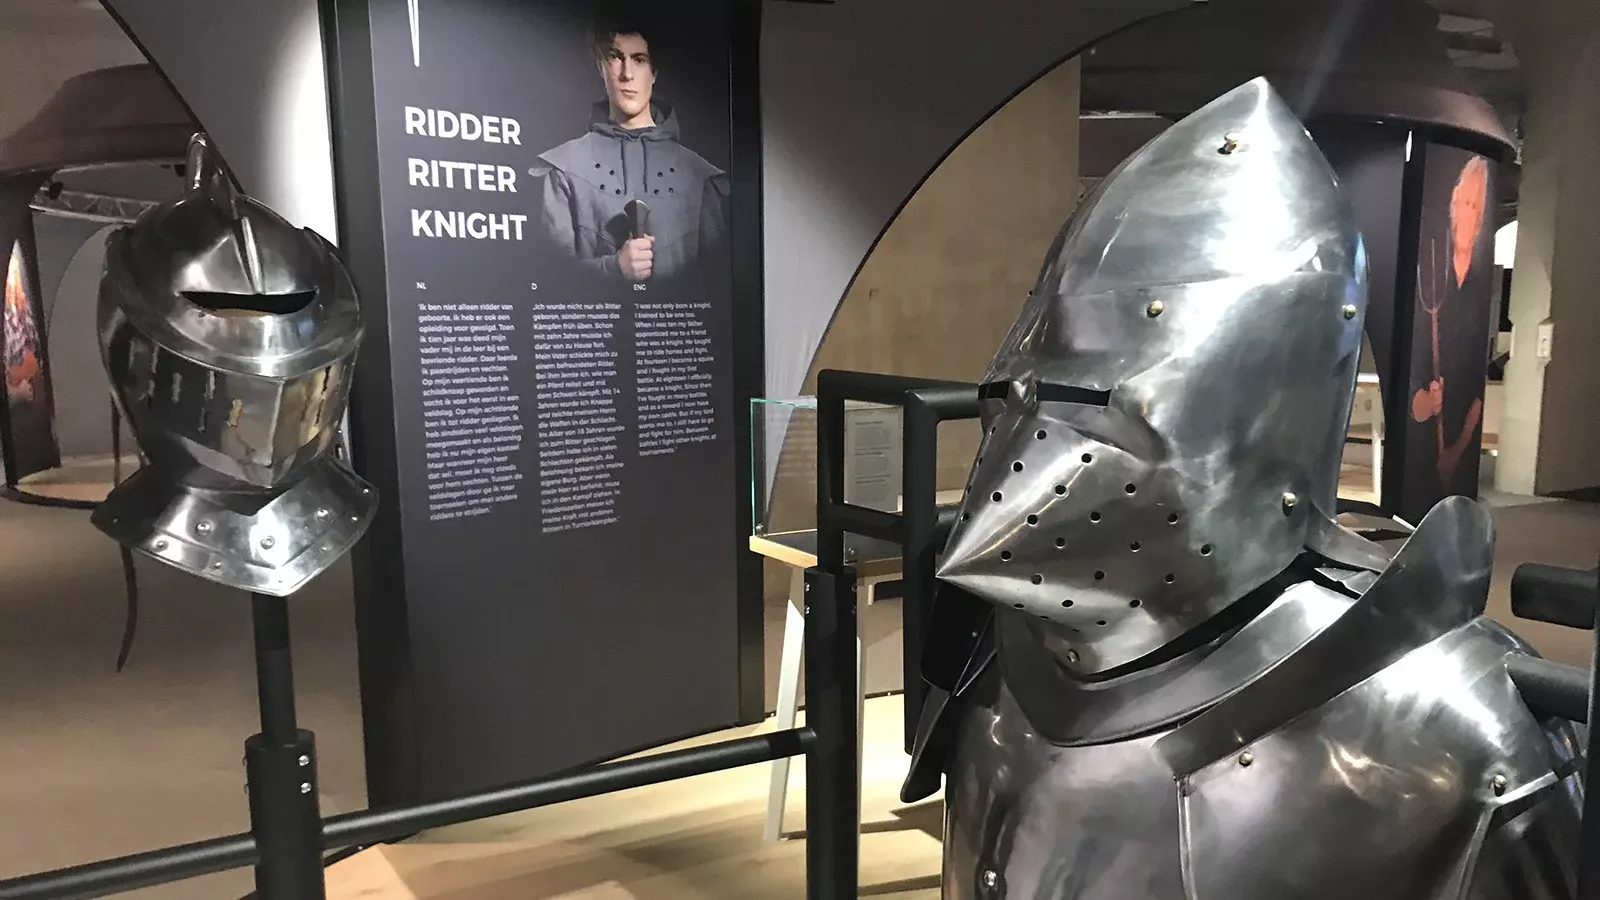 Knights and Castles, a new look at the Middle Ages